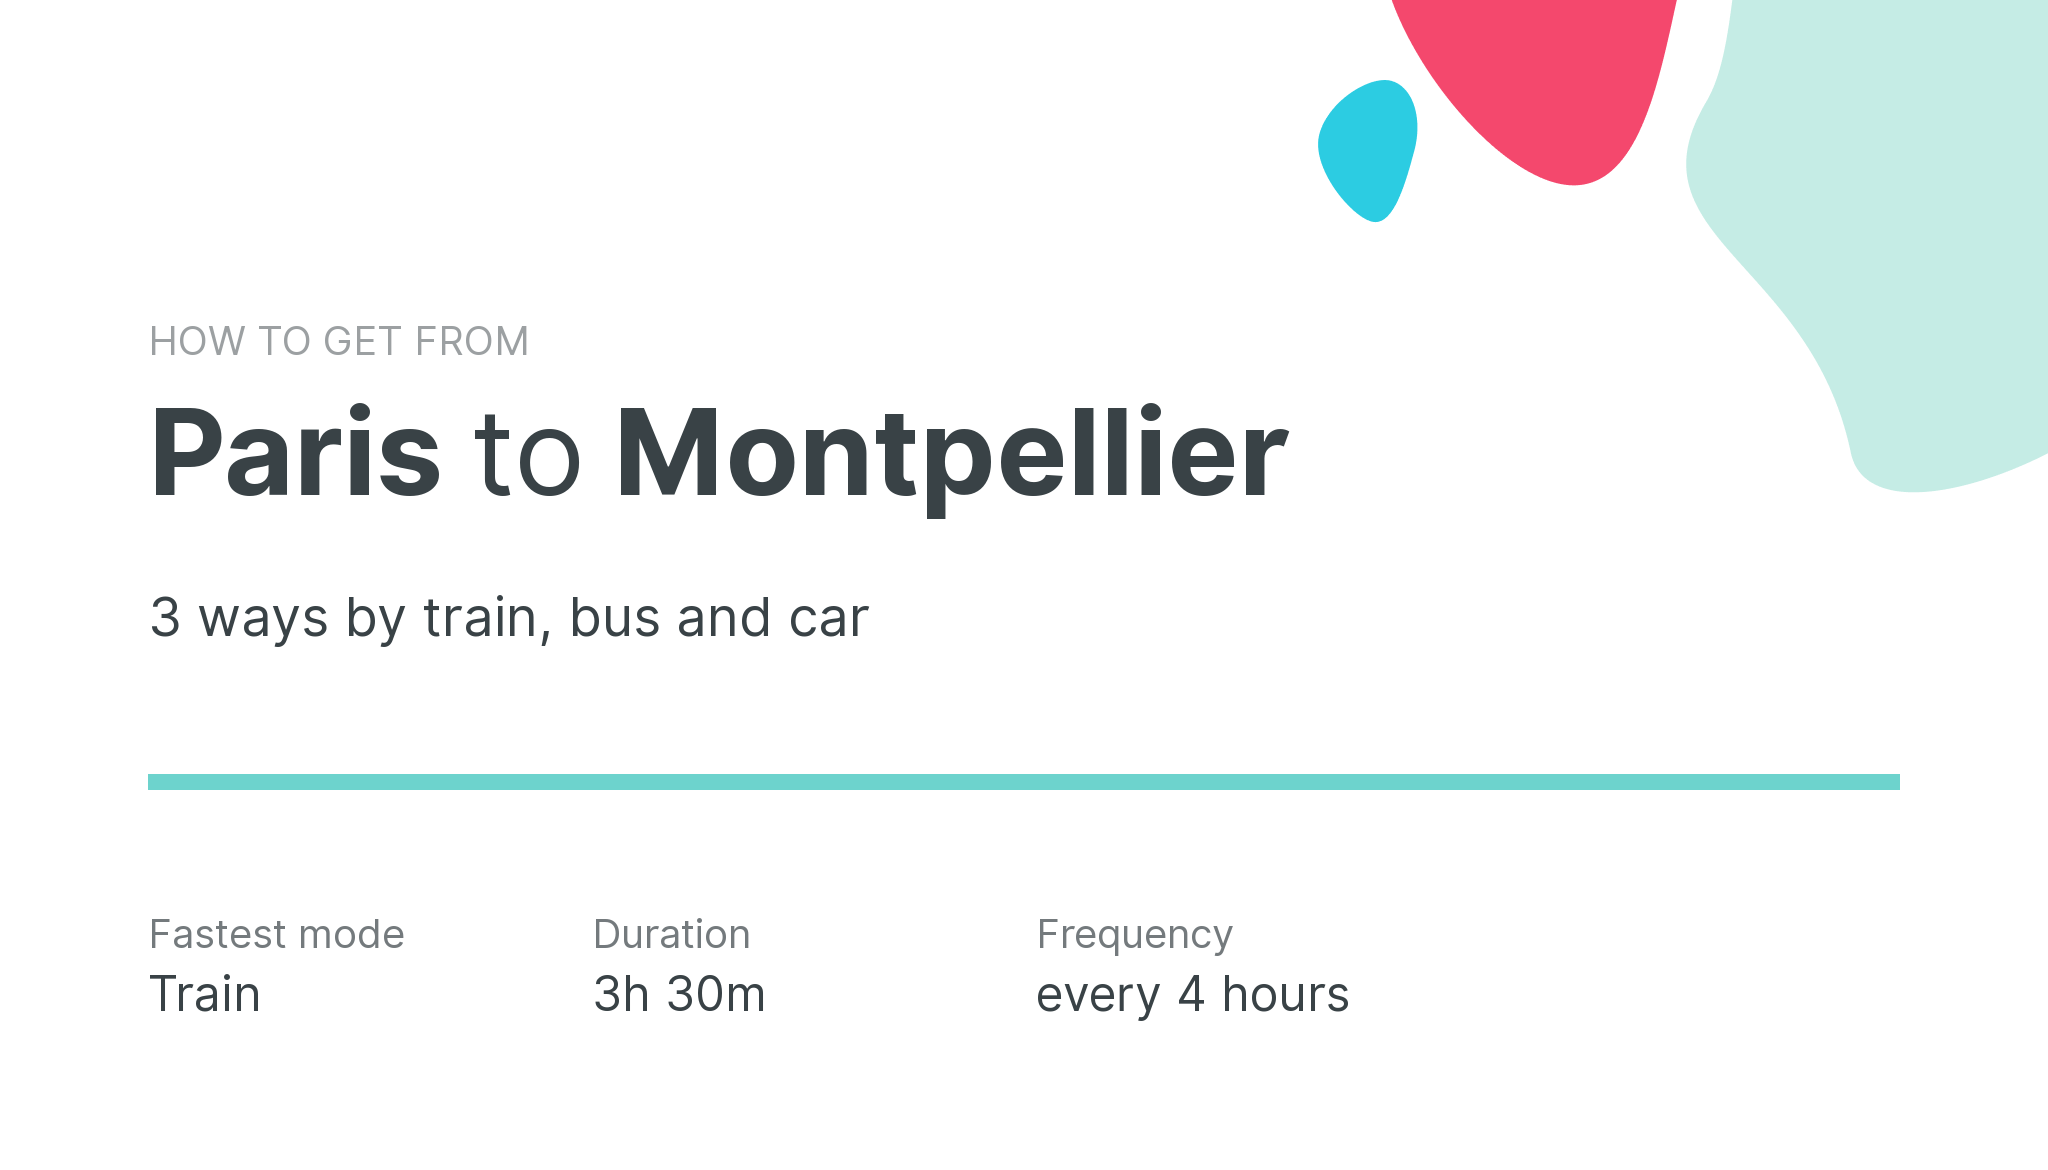 How do I get from Paris to Montpellier